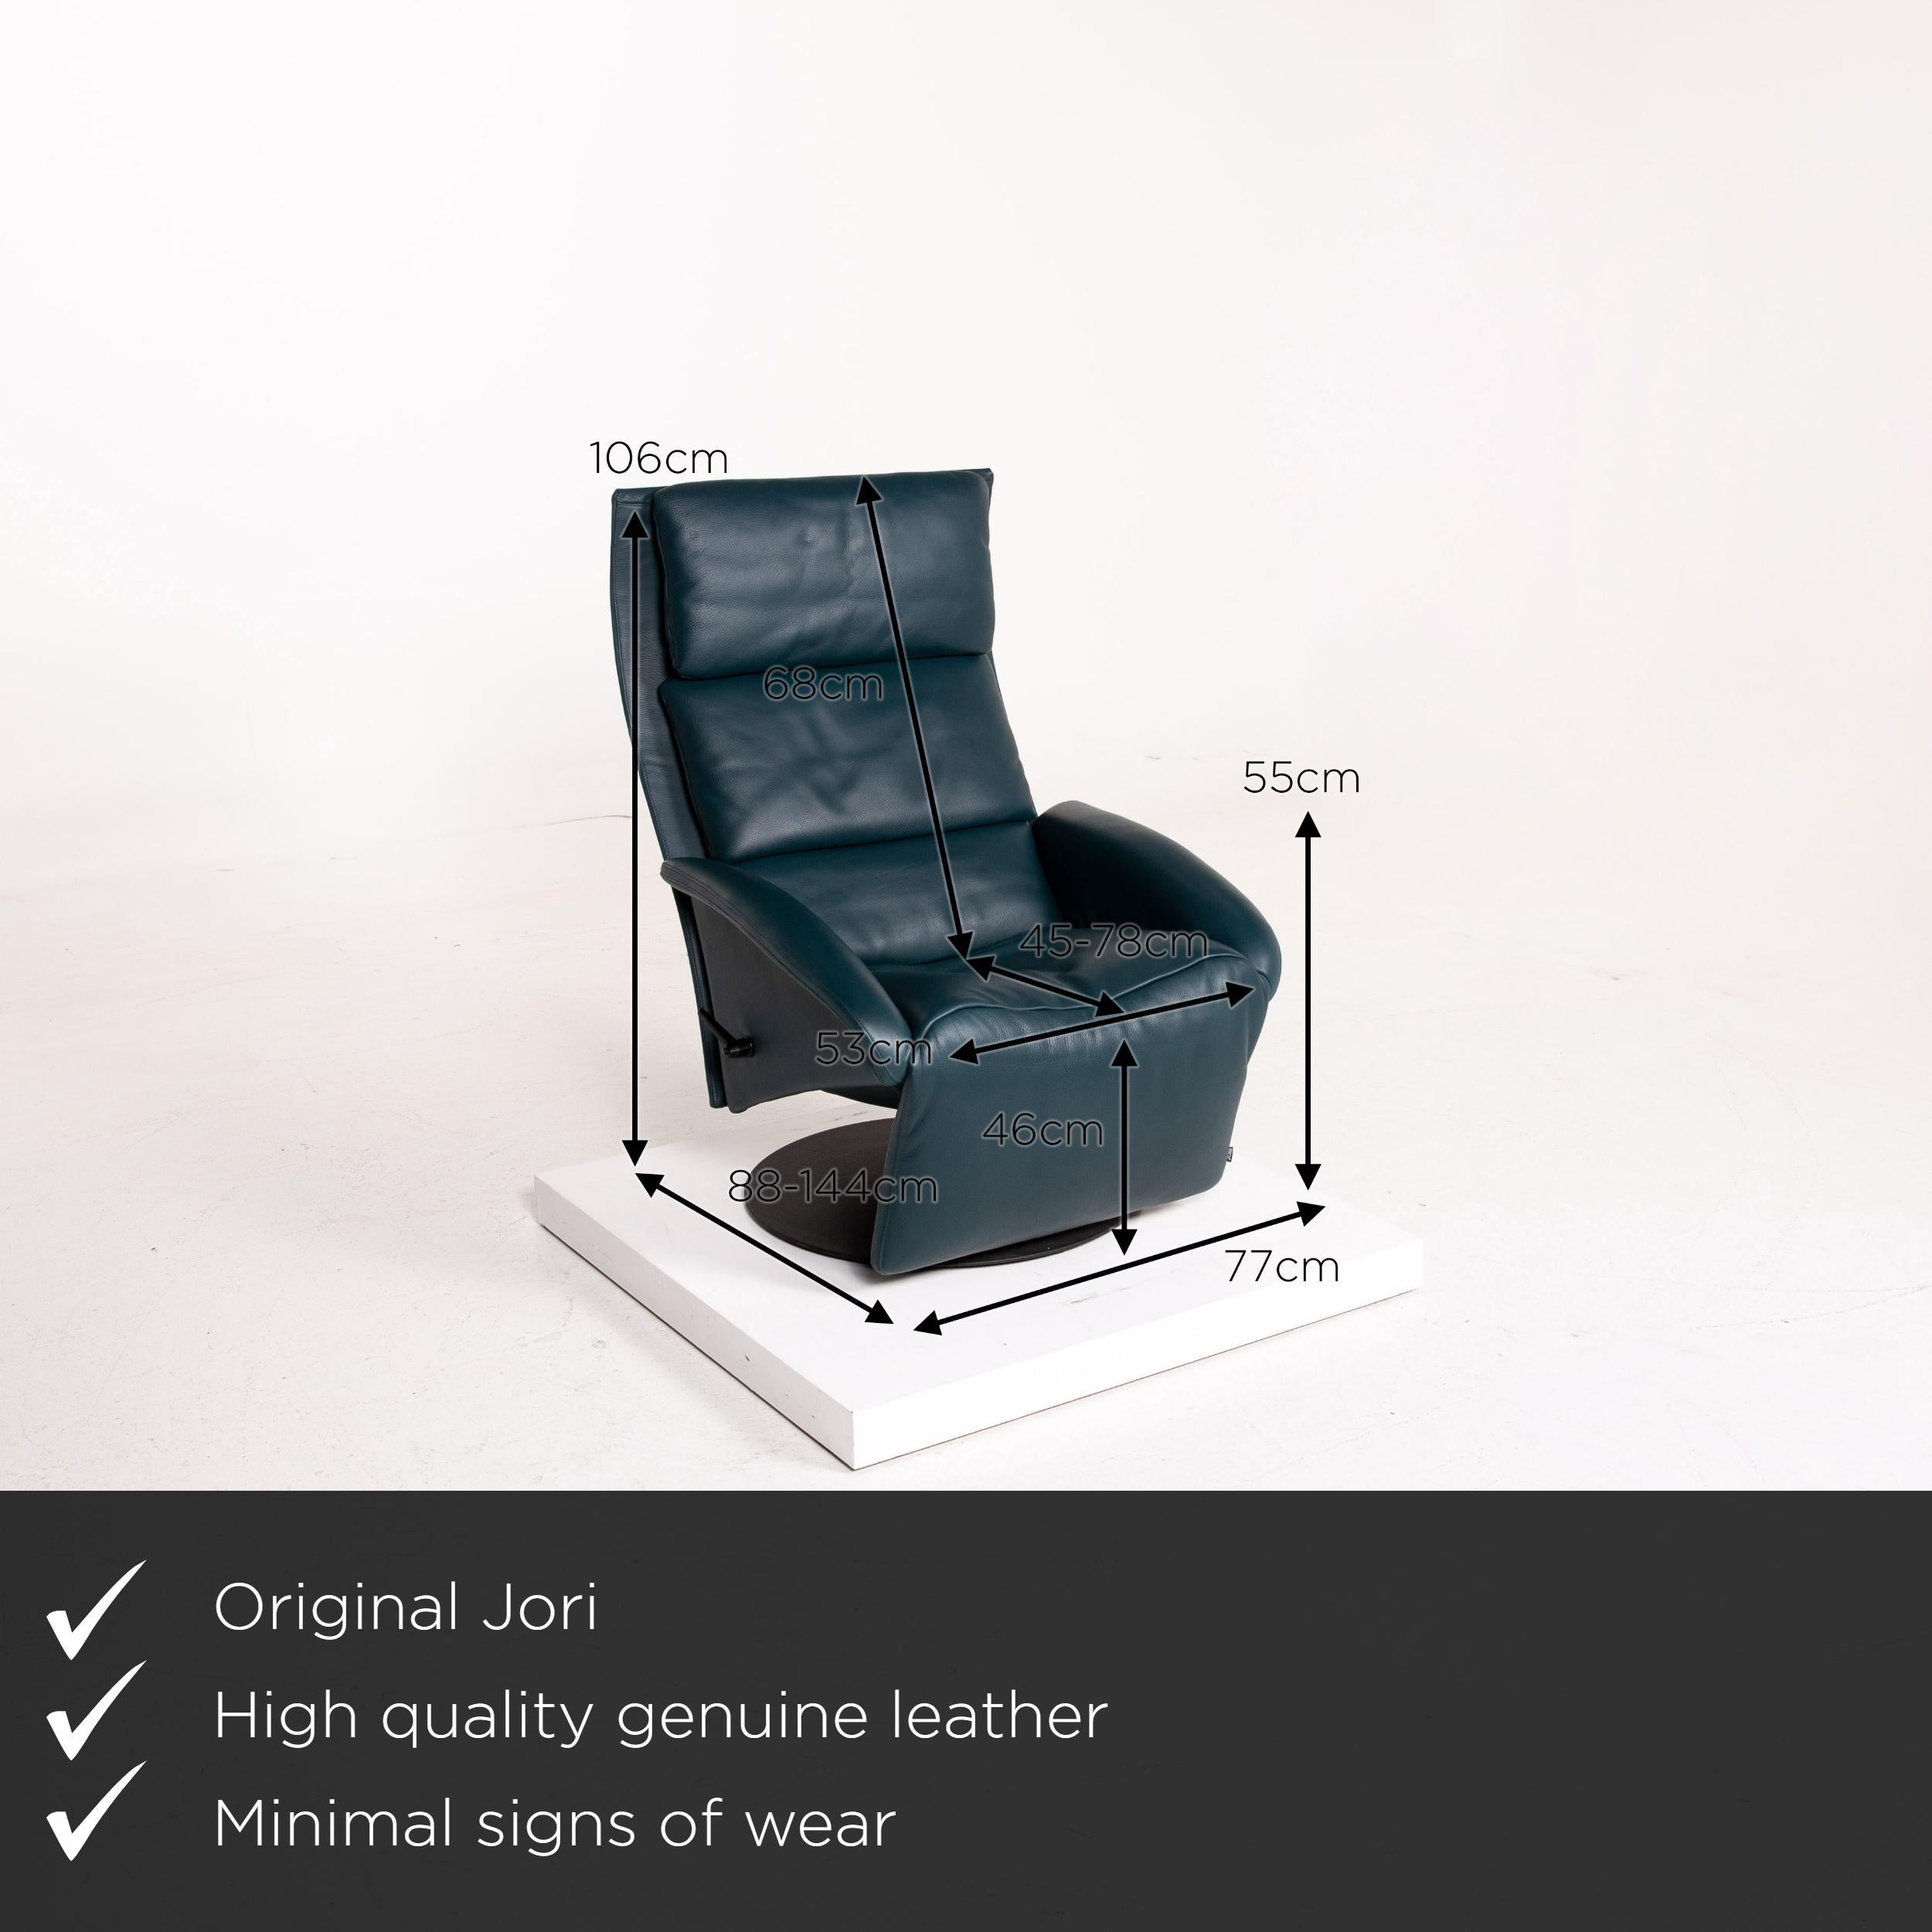 We present to you a JORI leather armchair petrol blue green relax chair function relax function.


 Product measurements in centimeters:
 

Depth 88
Width 77
Height 106
Seat height 46
Rest height 55
Seat depth 45
Seat width 53
Back